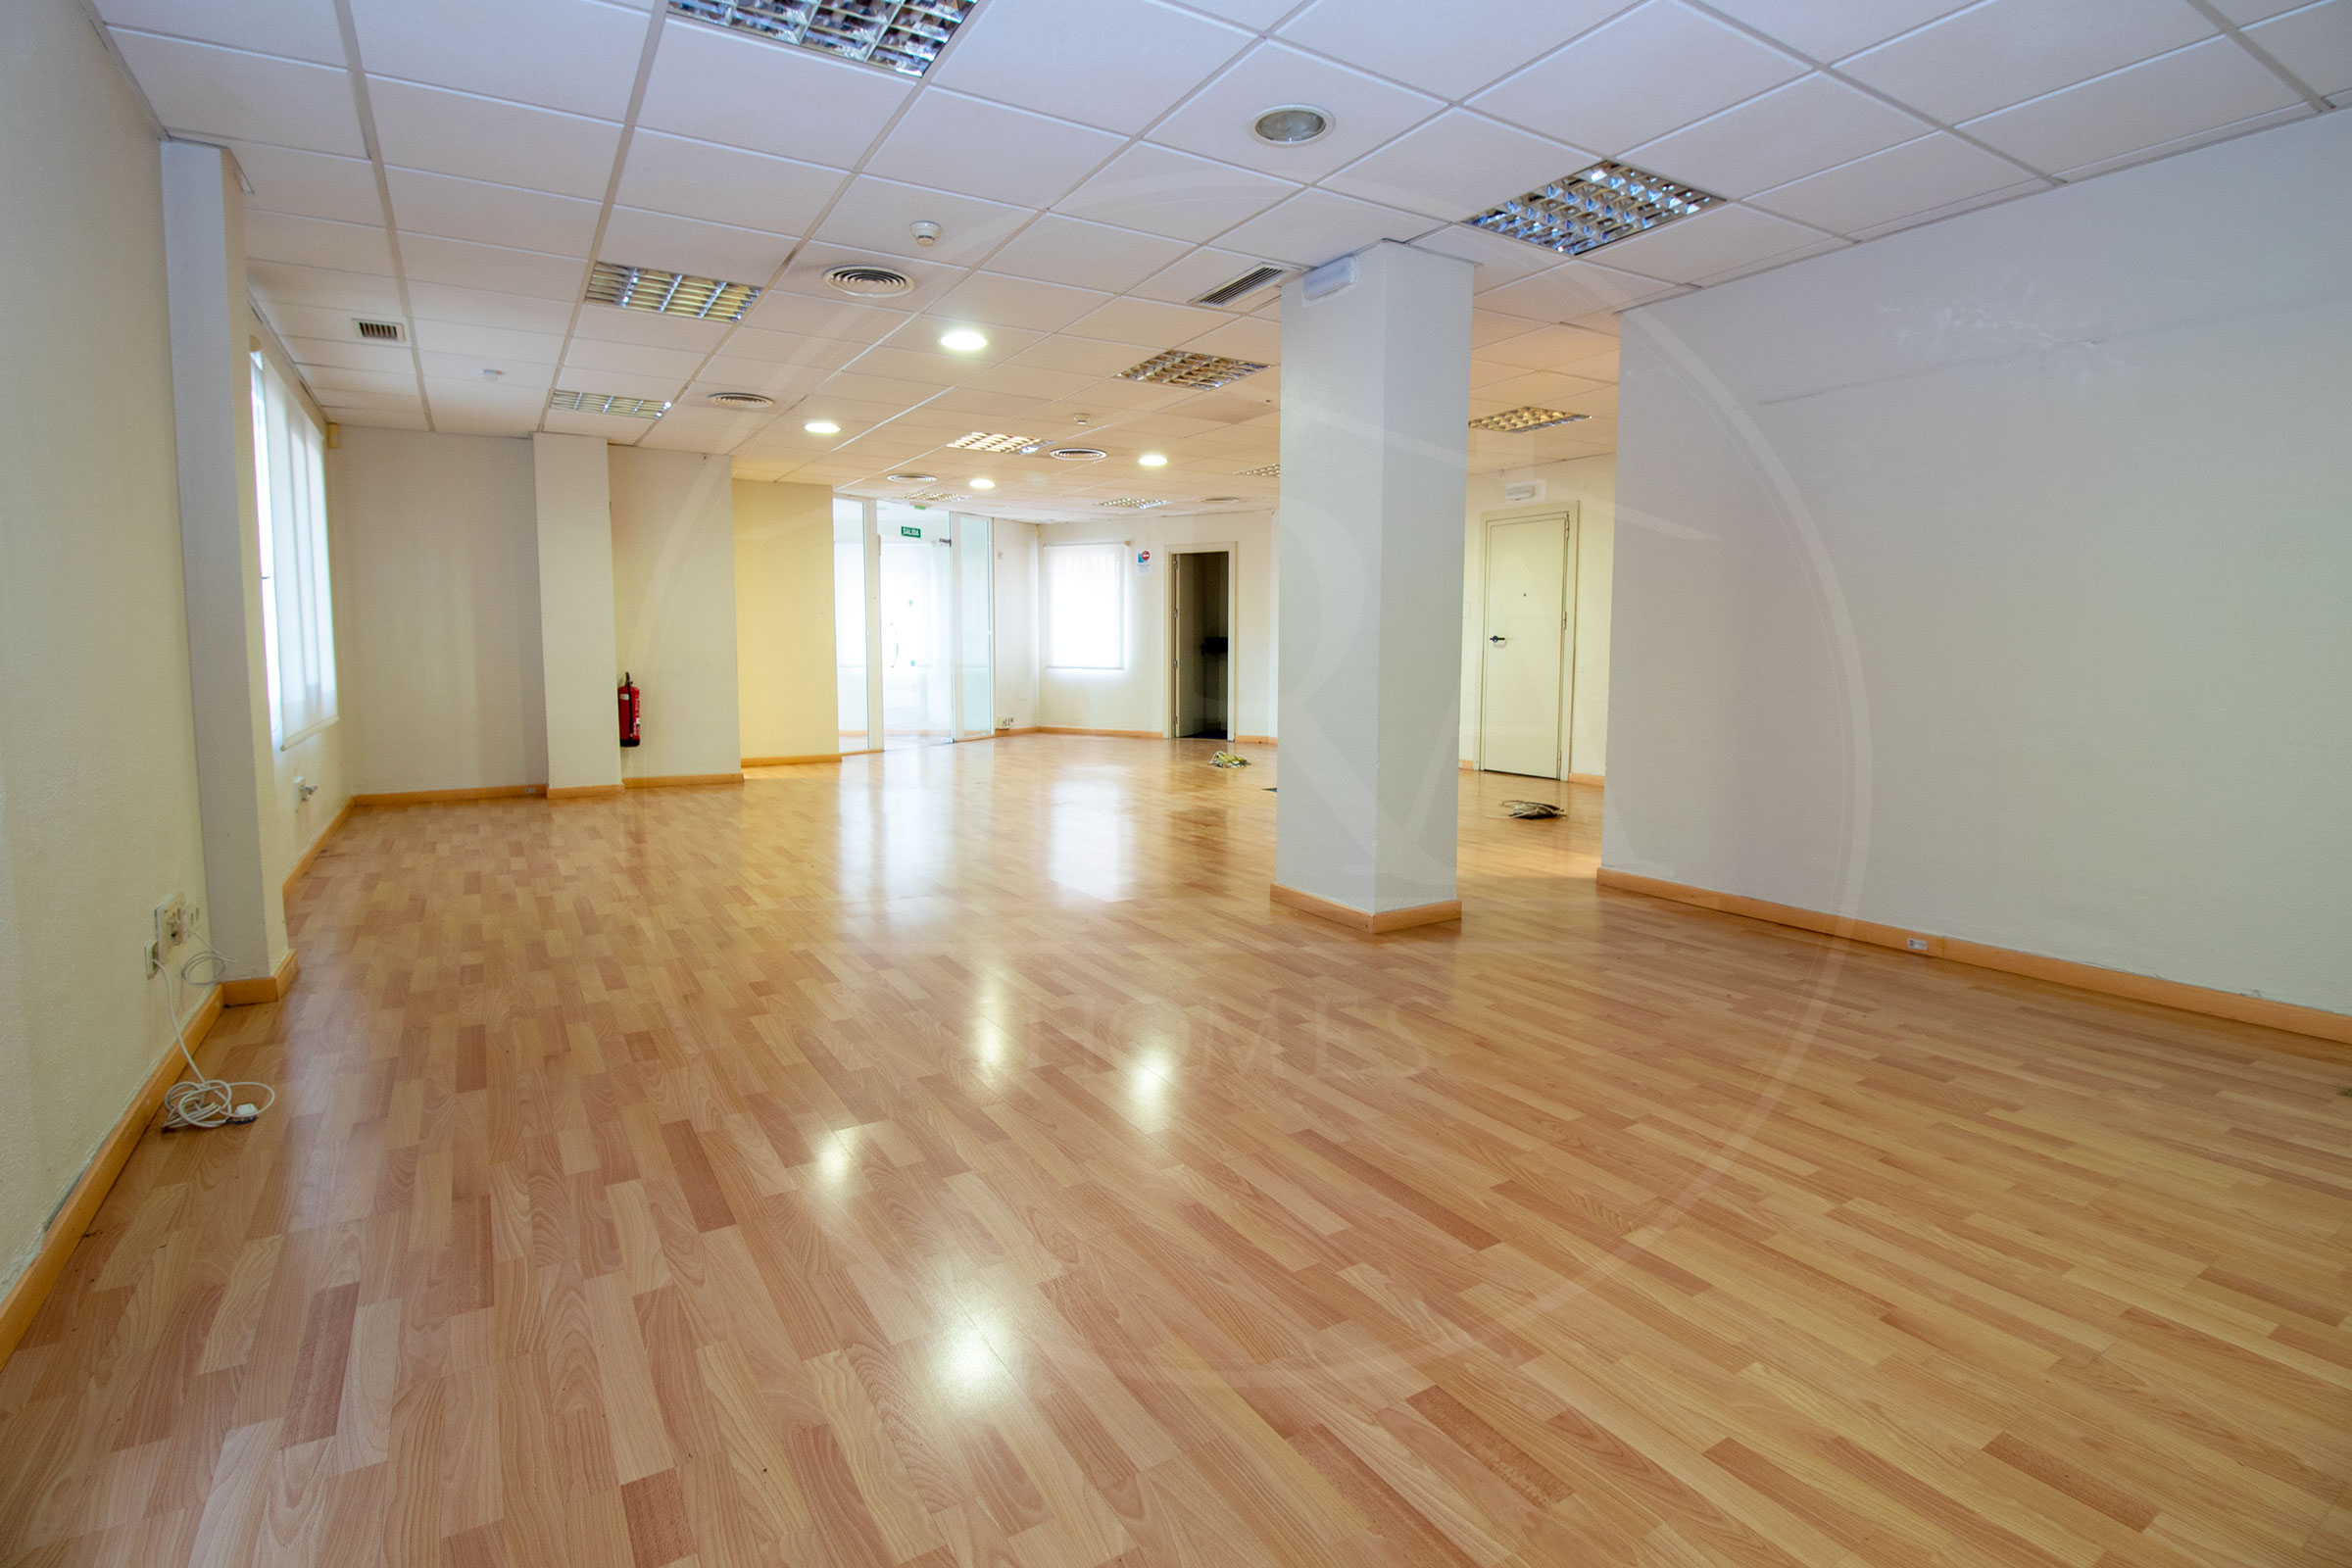 Commercial premises for rent in Fuengirola.